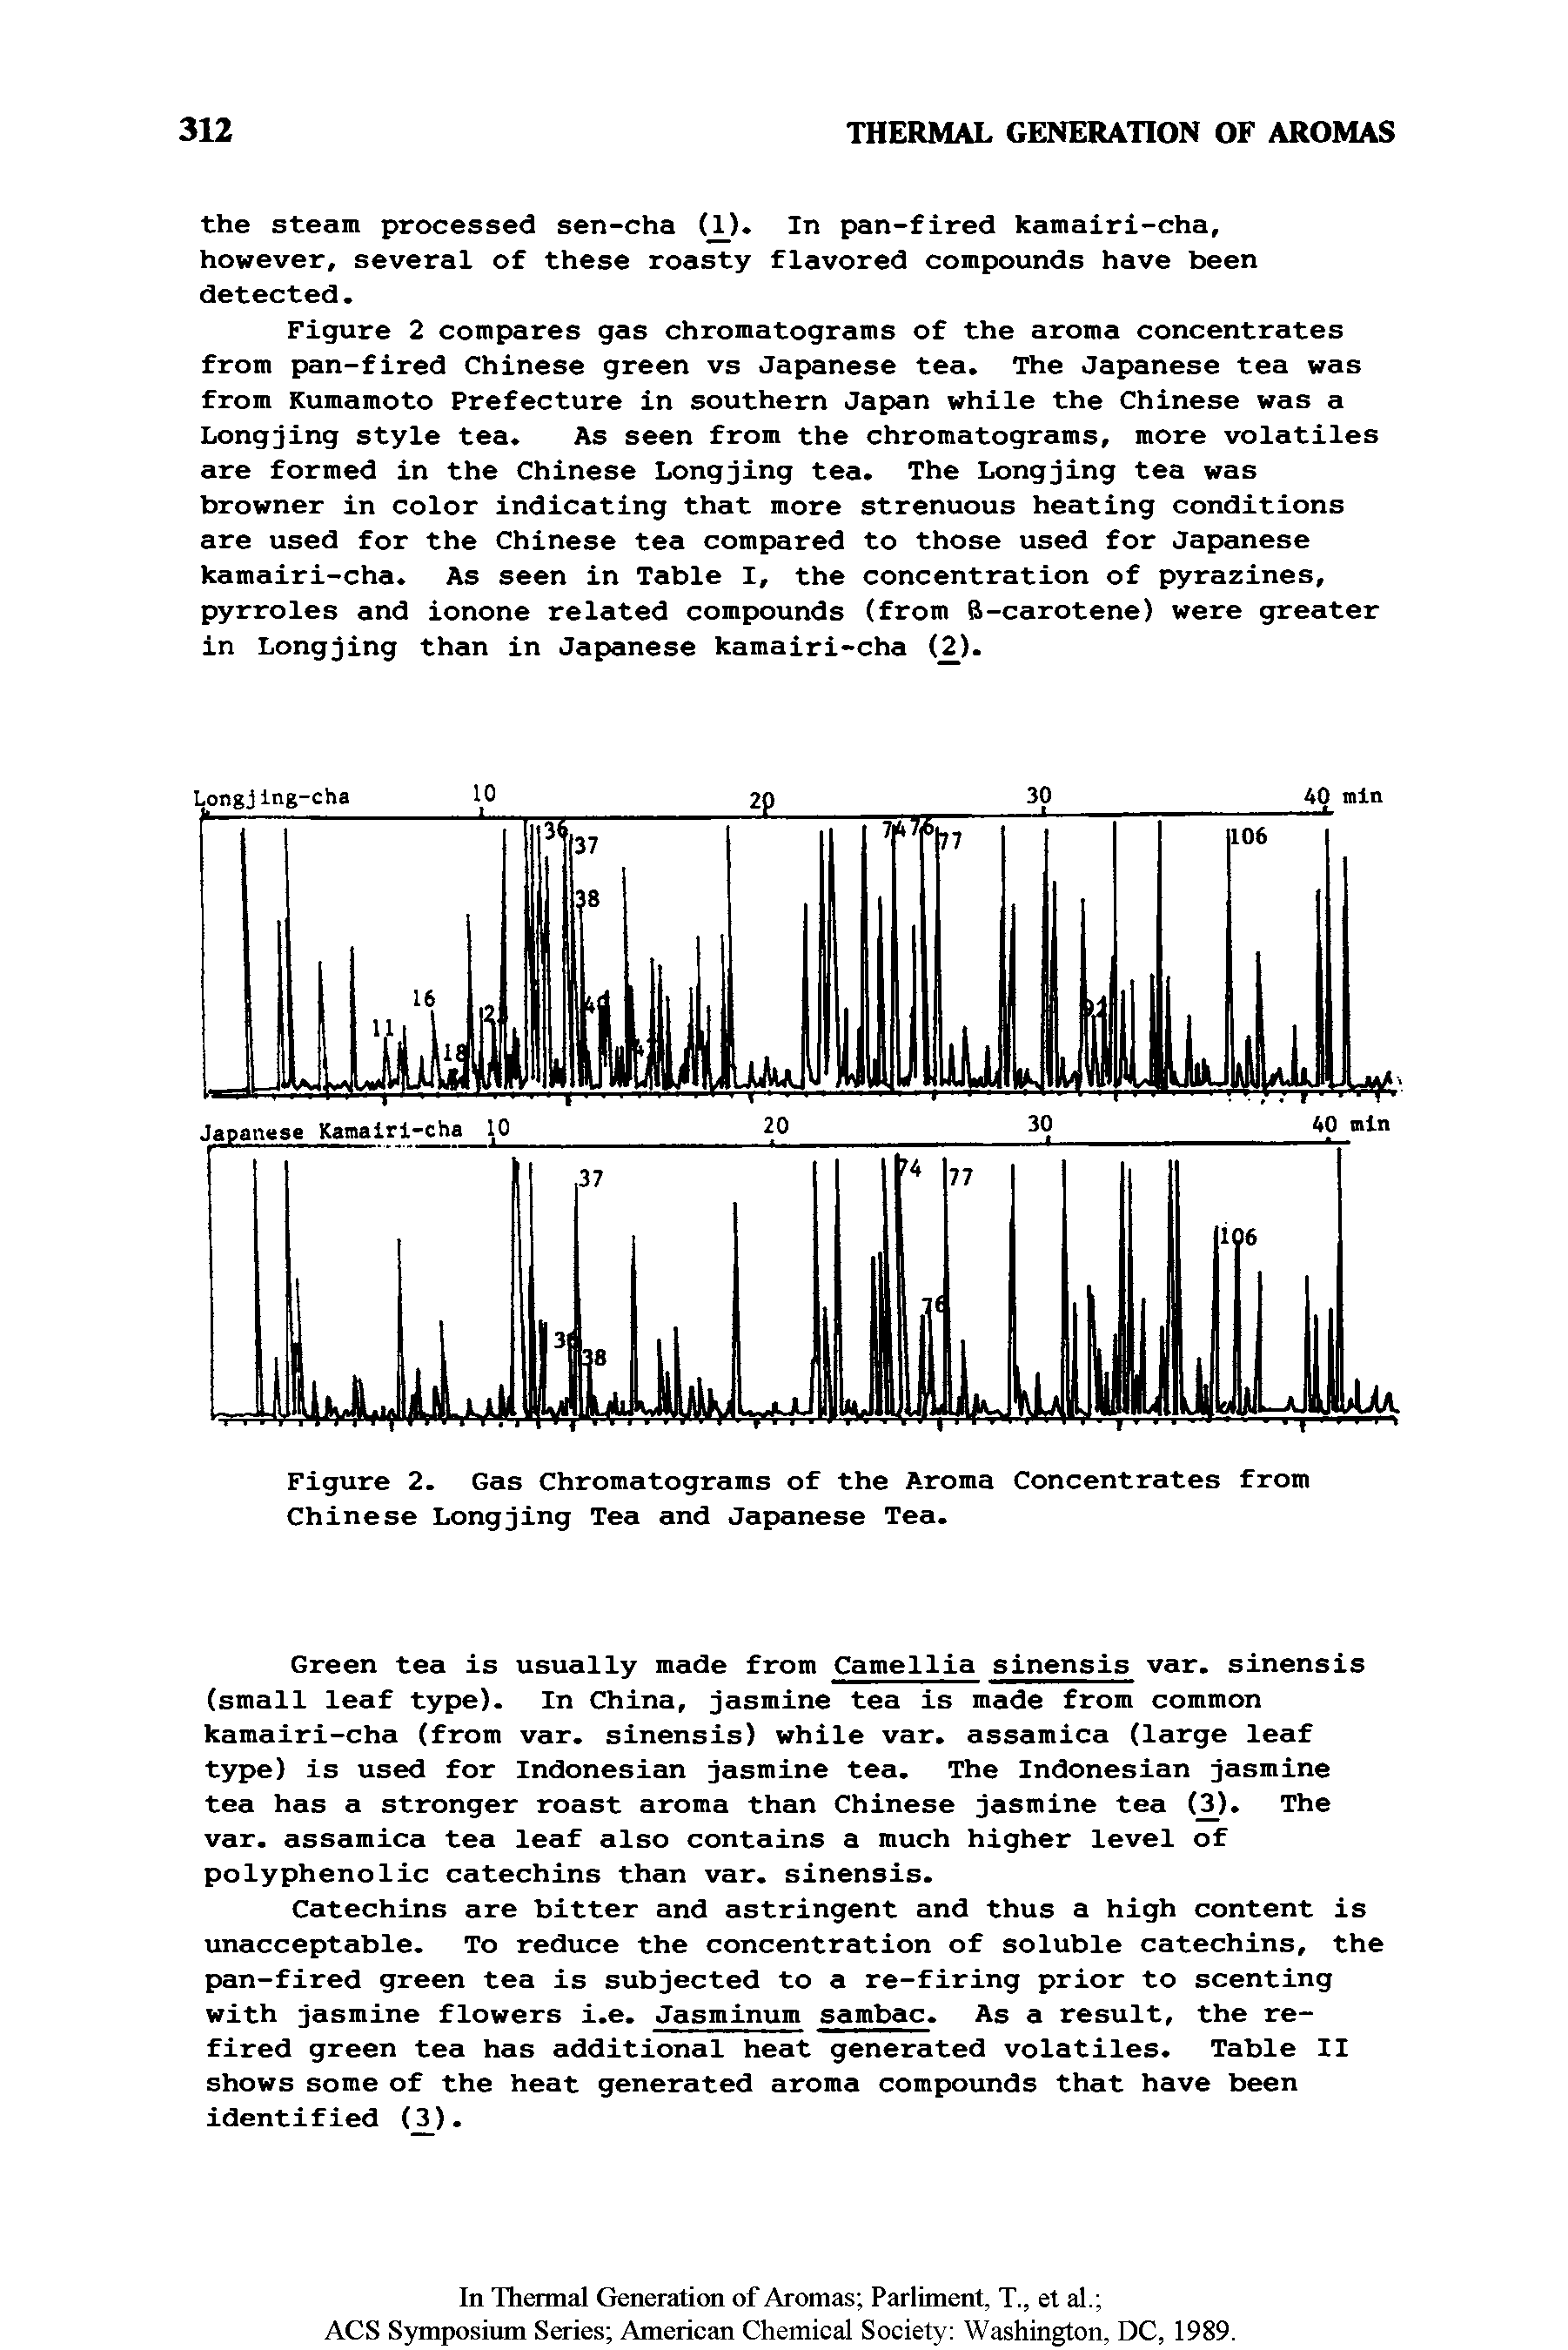 Figure 2. Gas Chromatograms of the Aroma Concentrates from Chinese Longjing Tea and Japanese Tea.